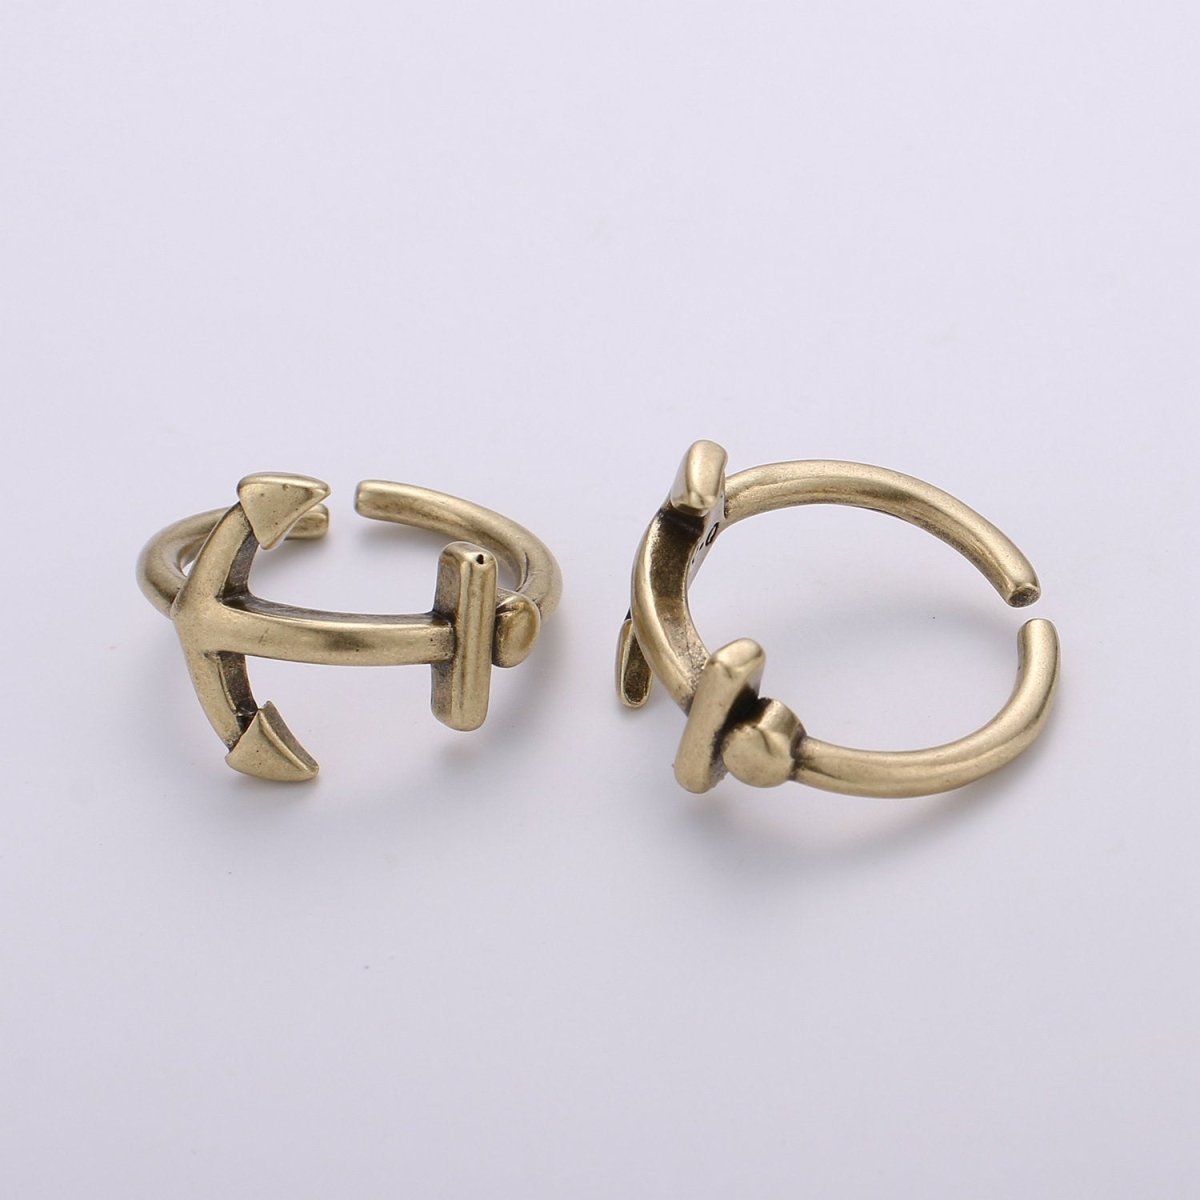 Sideways Anchor Ring in Gold or Antique Gold - Sideways Anchor Ring - Horizontal Anchor Ring - Adjustable Ring R-019 R-020 - DLUXCA